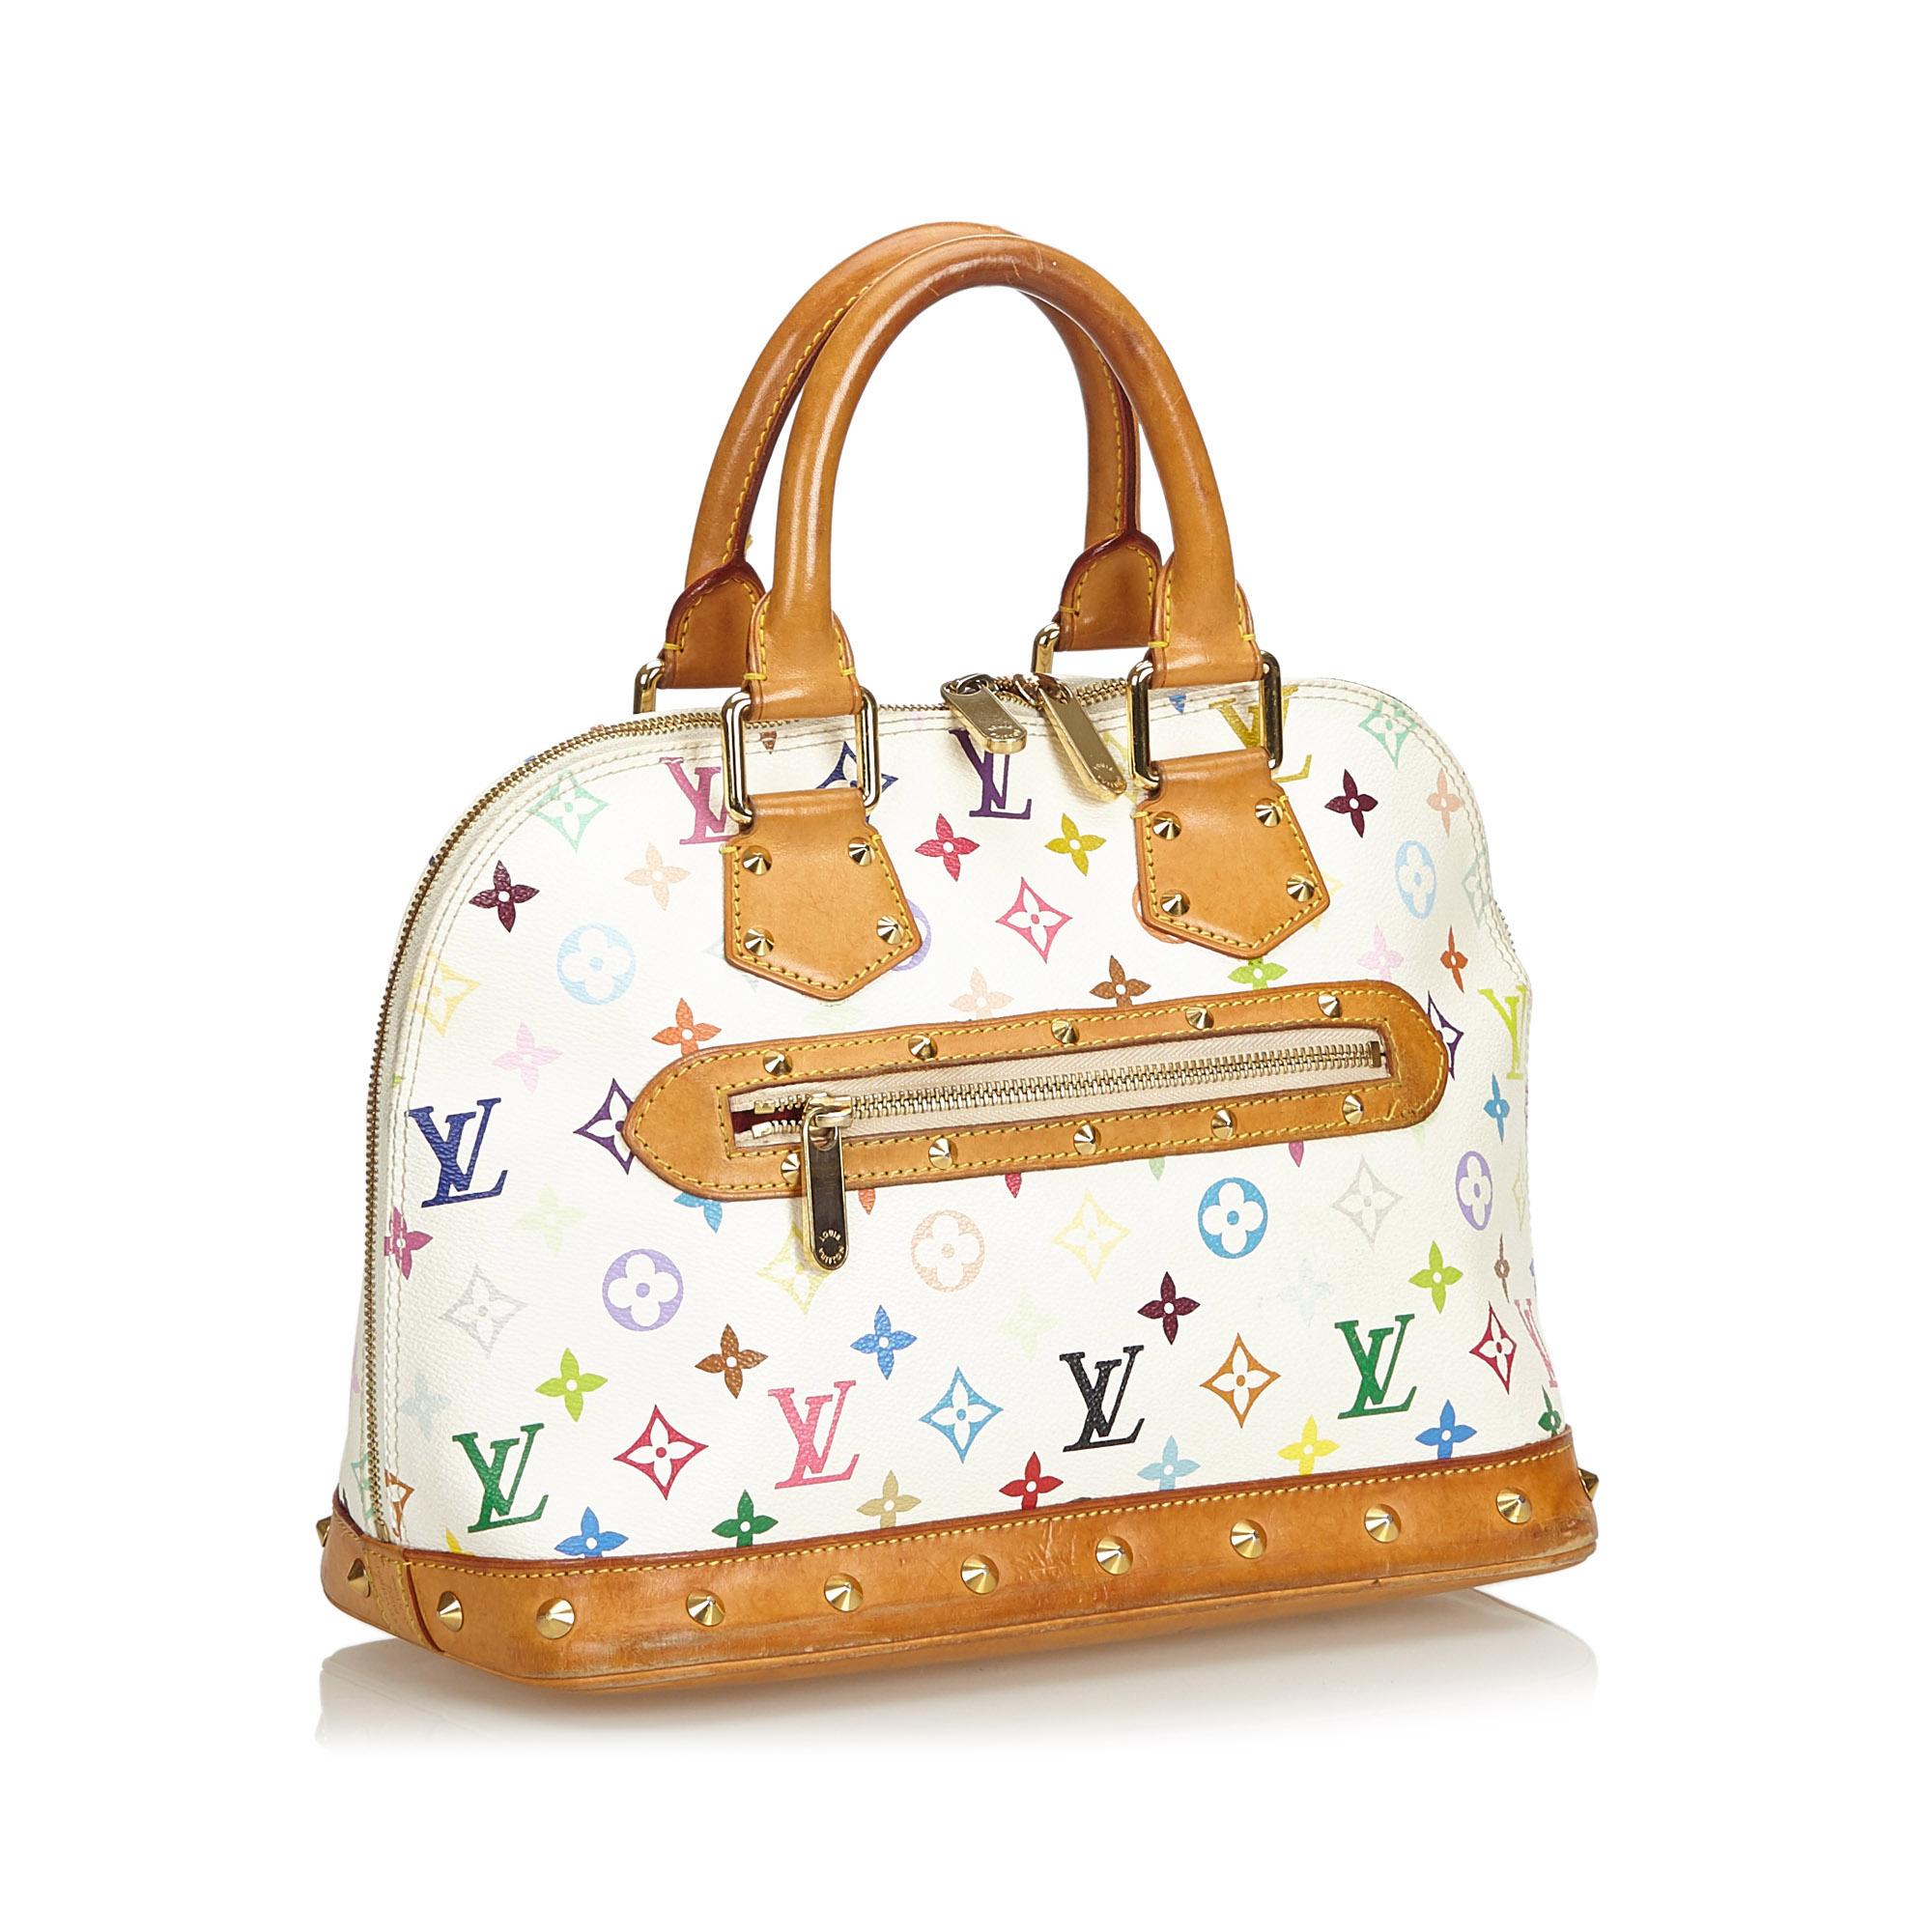 The Alma PM features the Monogram Multicolore canvas, rolled vachetta handles, vachetta trim, a studded base, an exterior zip pocket, a two-way zip around closure, and interior flat and cell pocket. It carries as B condition rating.

Inclusions: